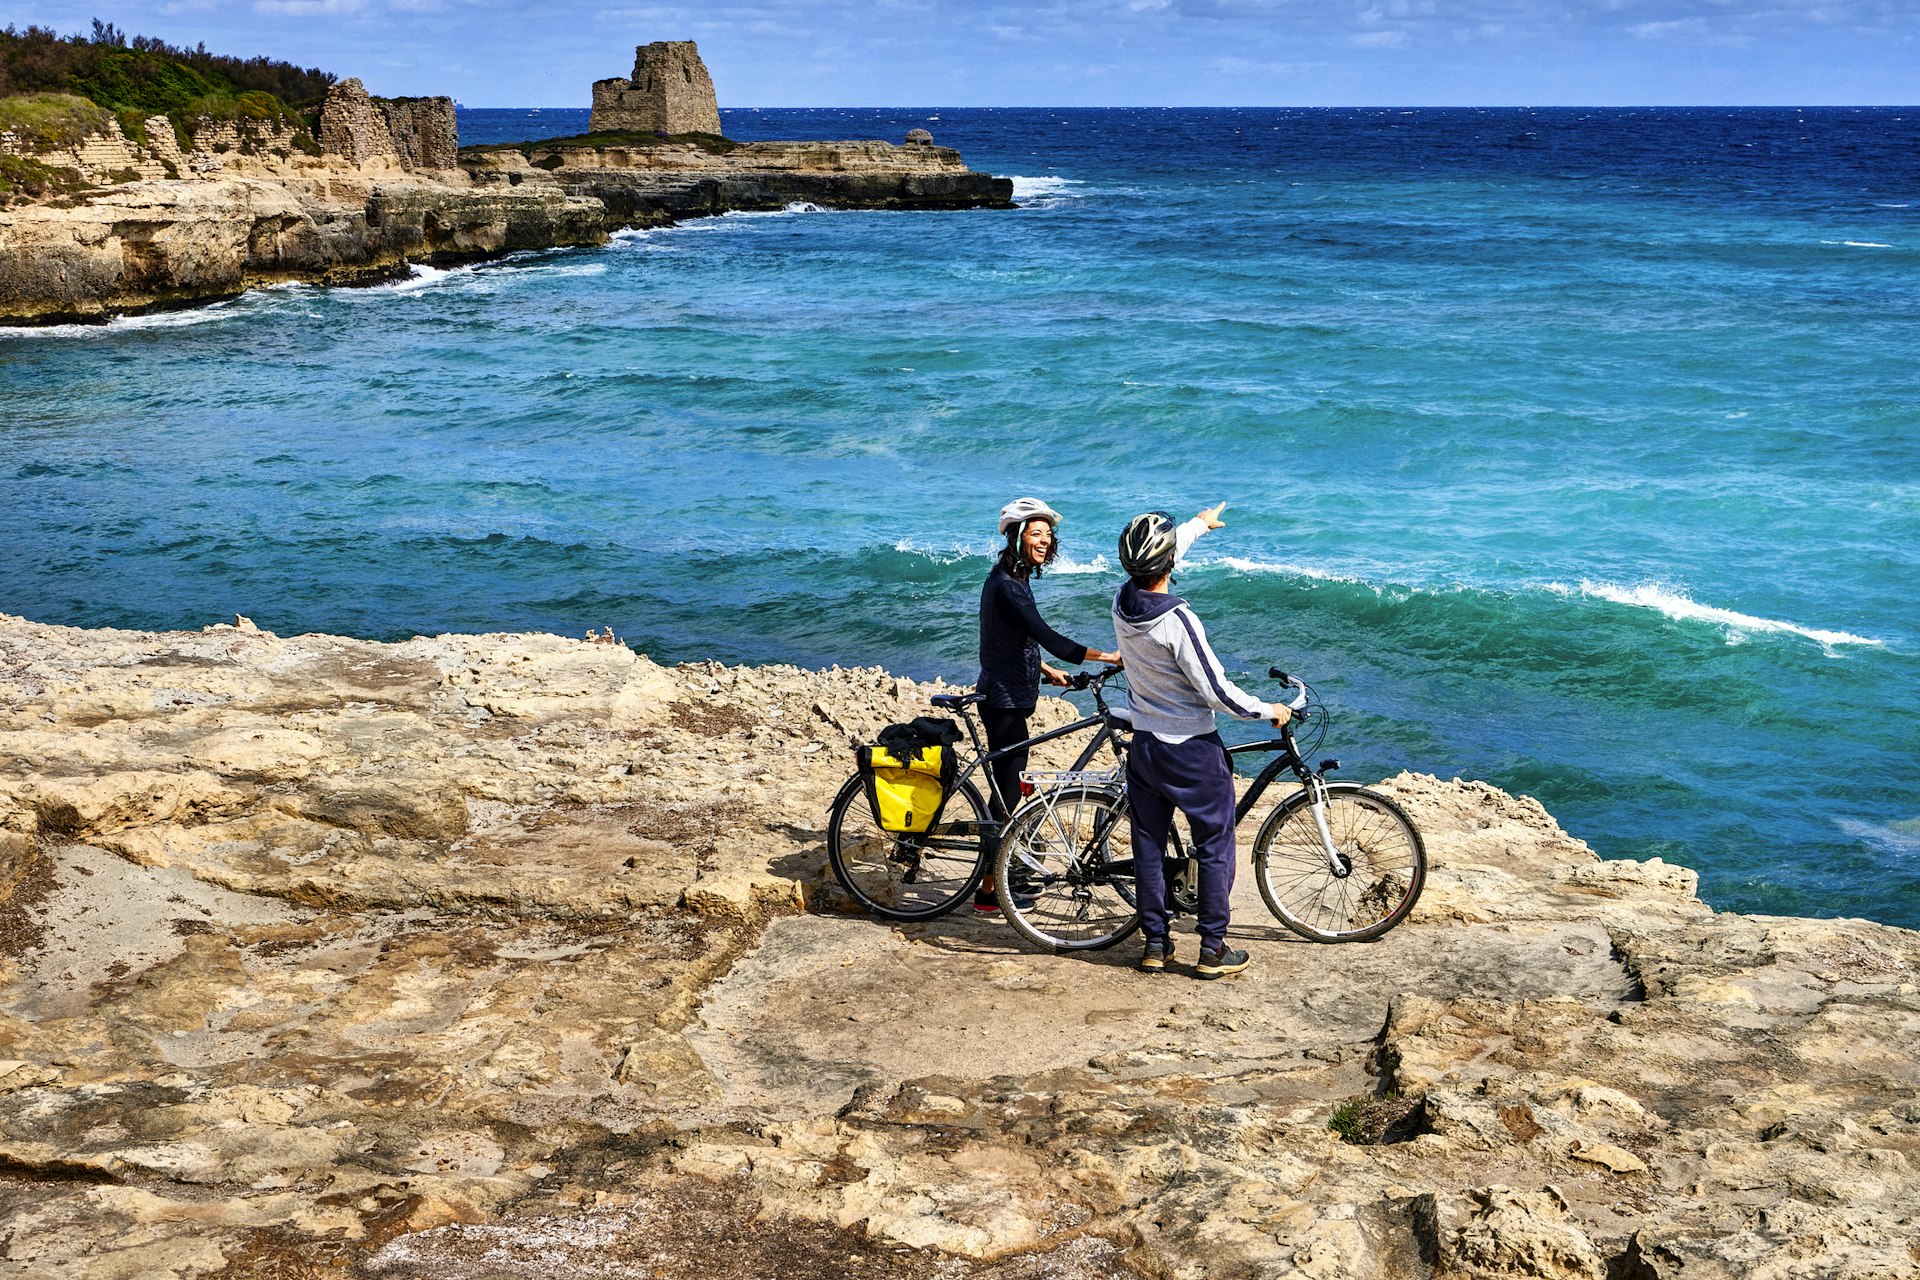 Two people pause with their bicycles on a clifftop looking out over the blue sea and the undulating coastline